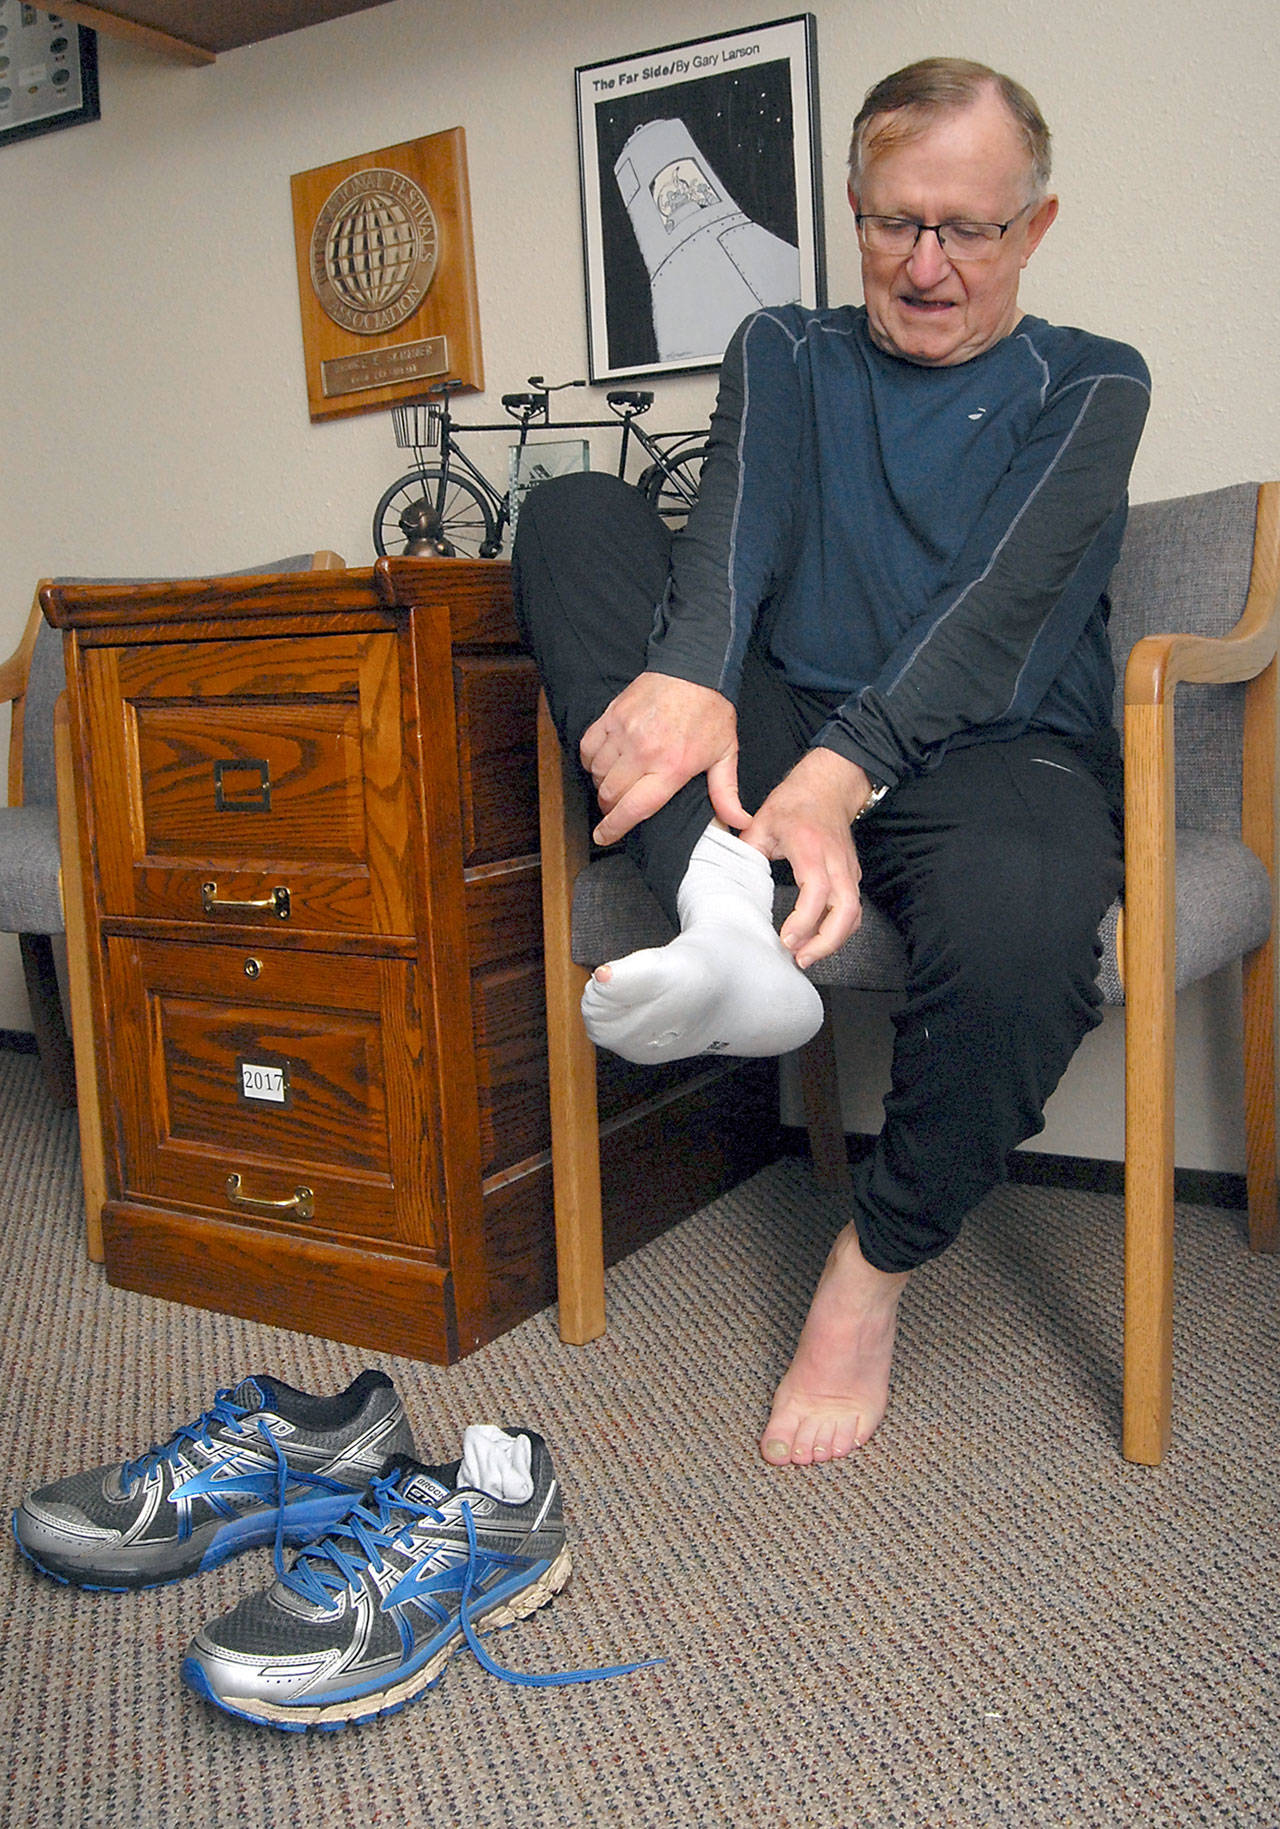 Bruce Skinner, executive director of the Olympic Medical Center Foundation, takes off his running shoes and socks after a Saturday morning warmup run in Port Angeles in preparation for running a marathon. (Keith Thorpe/Peninsula Daily News)